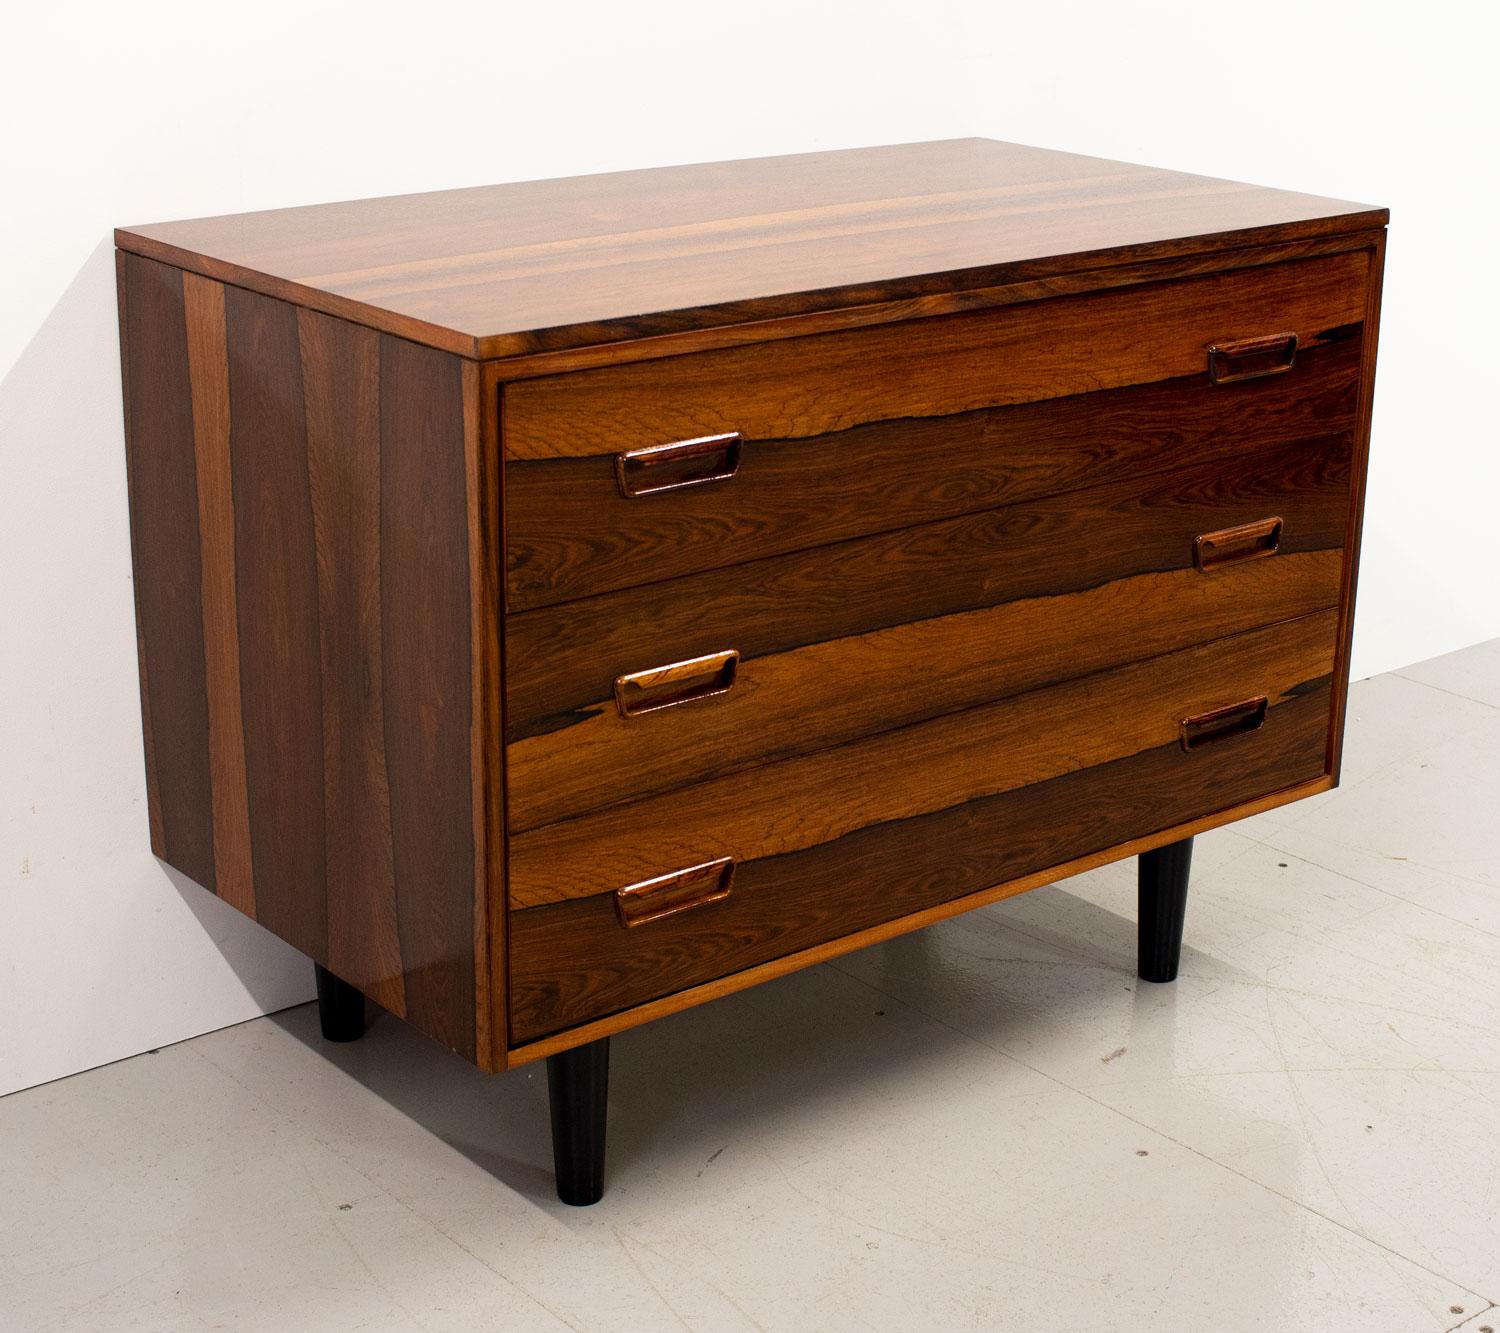 Danish Rosewood Chest of Drawers in the manner of Arne Wahl Iversen, 1960s For Sale 1